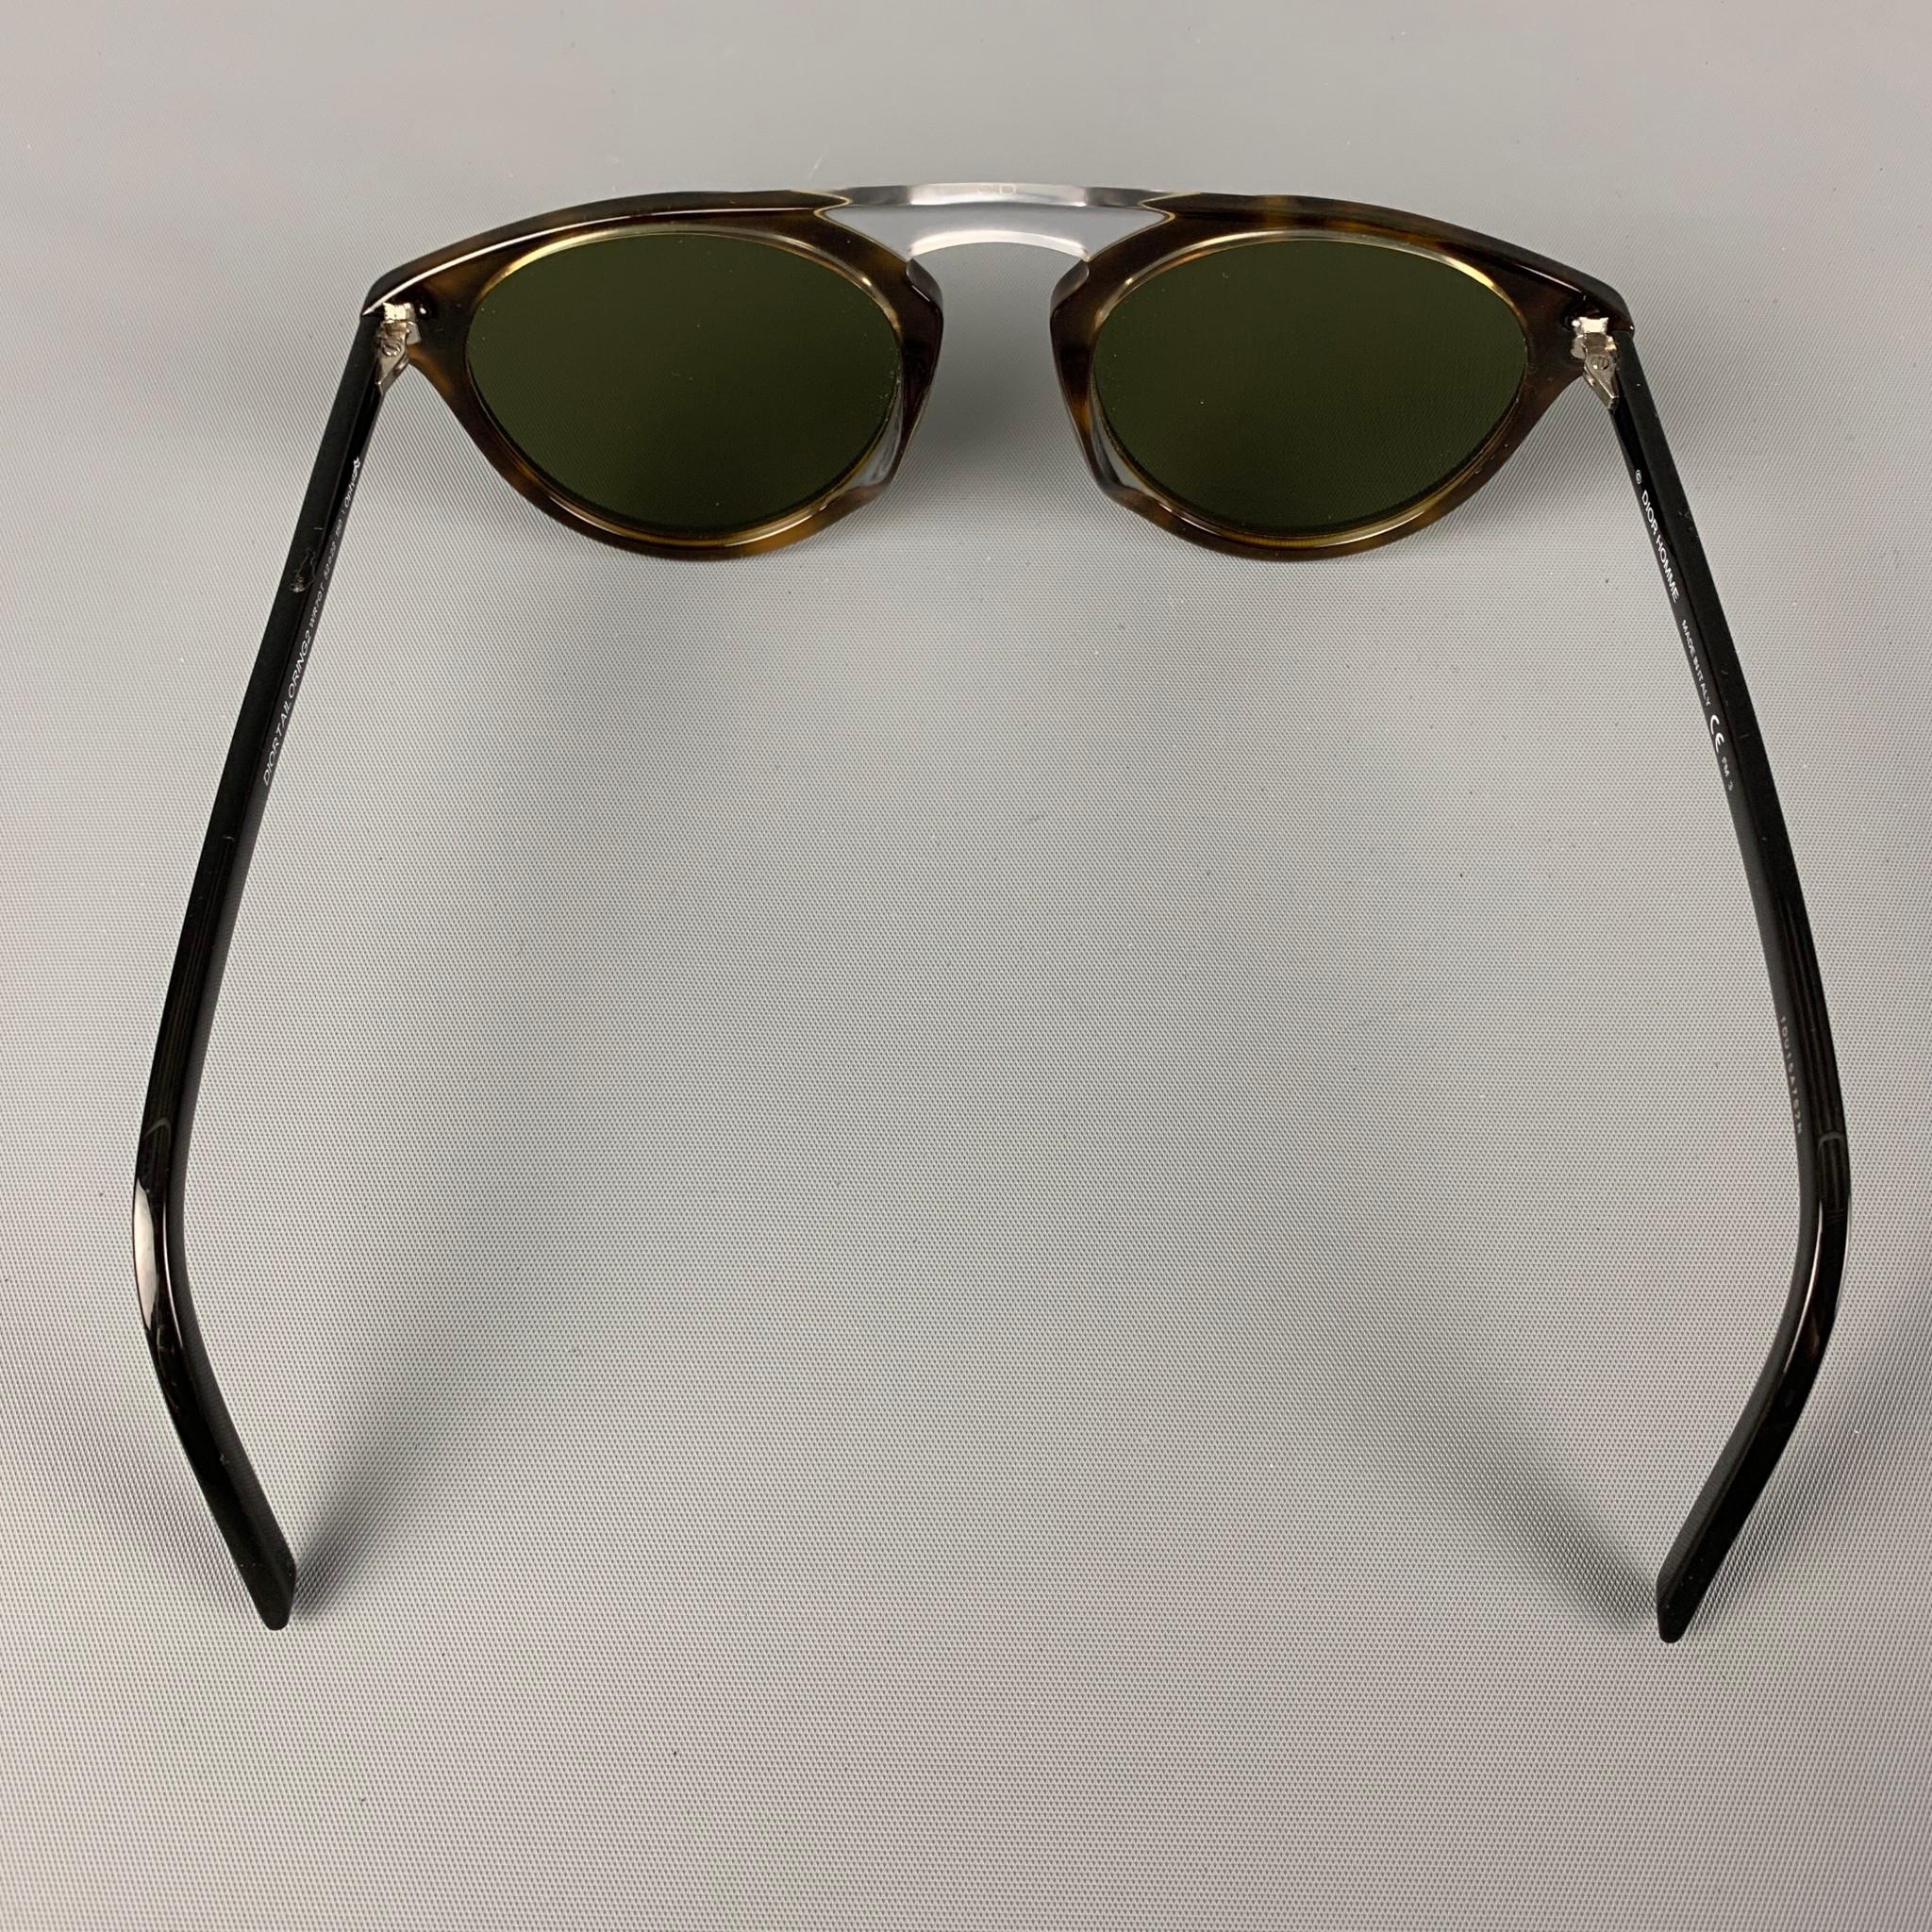 DIOR HOMME 'TAILORING2' sunglasses comes in a black & clear acetate featuring silver tone hardware and tinted lenses. Includes case. Made in Italy.

Very Good Pre-Owned Condition.
Marked: TDU15S7S2N

Measurements:

Length: 14 cm.
Height: 5 in.
 